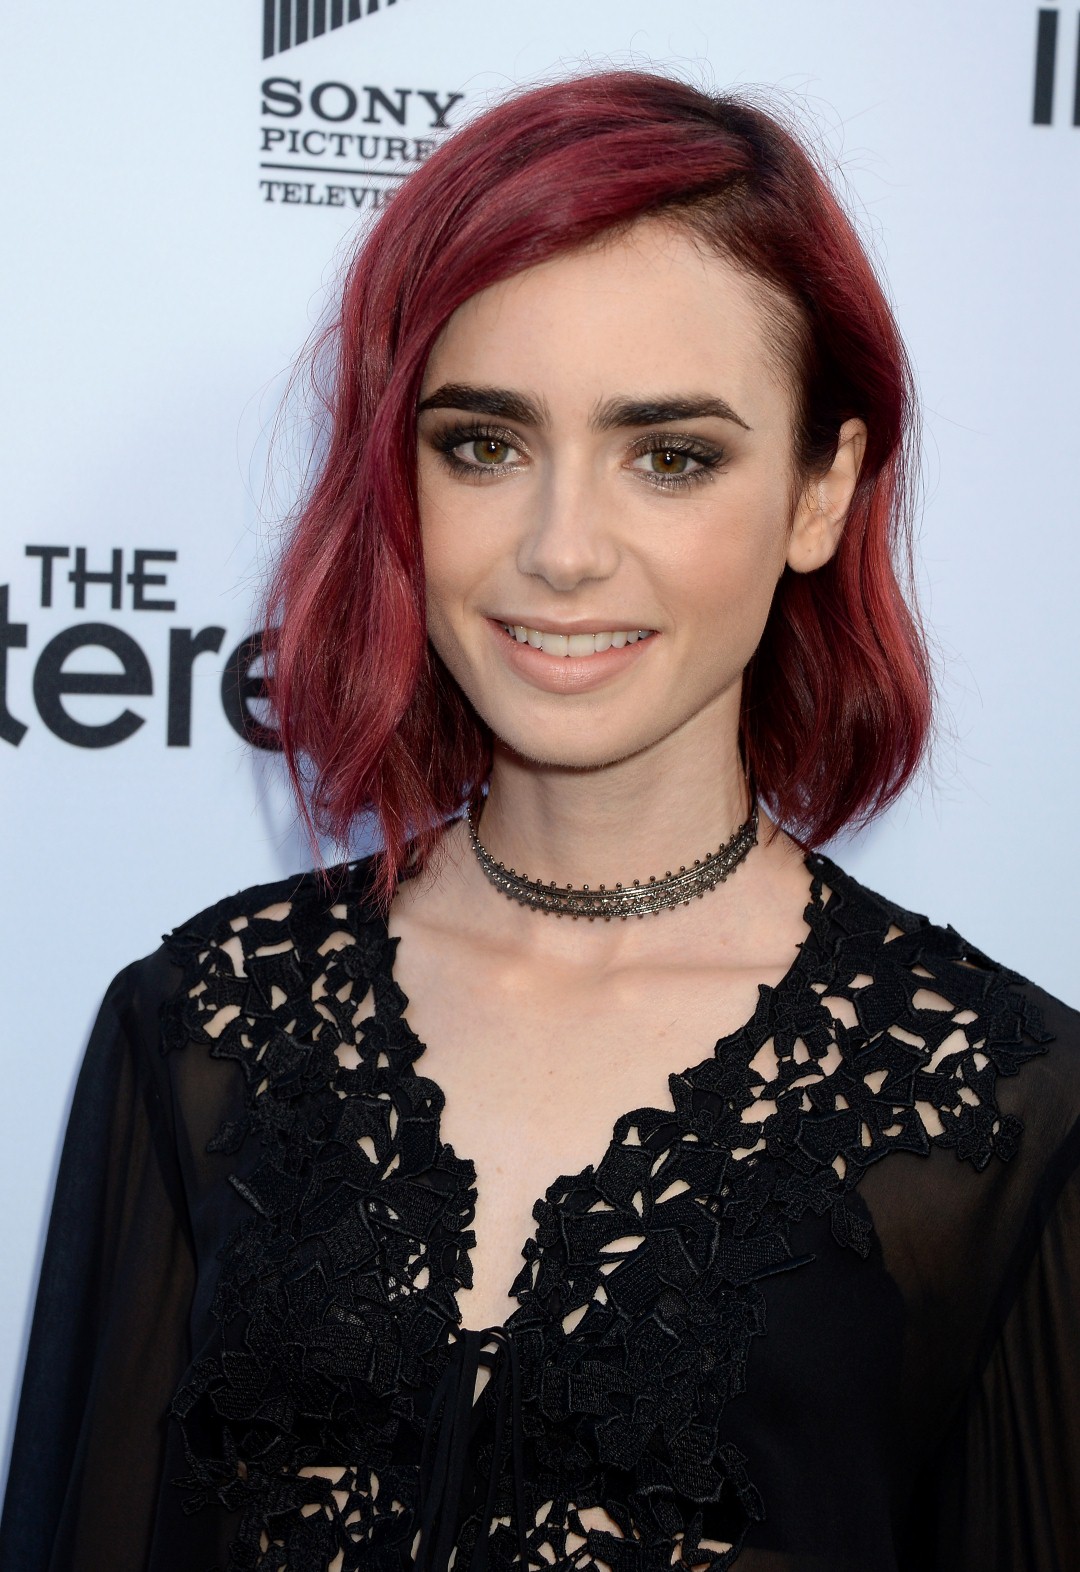 lily-collins-sony-pictures-tv-social-soiree-in-culver-city-june-28-33-pics-10 (Large).jpg